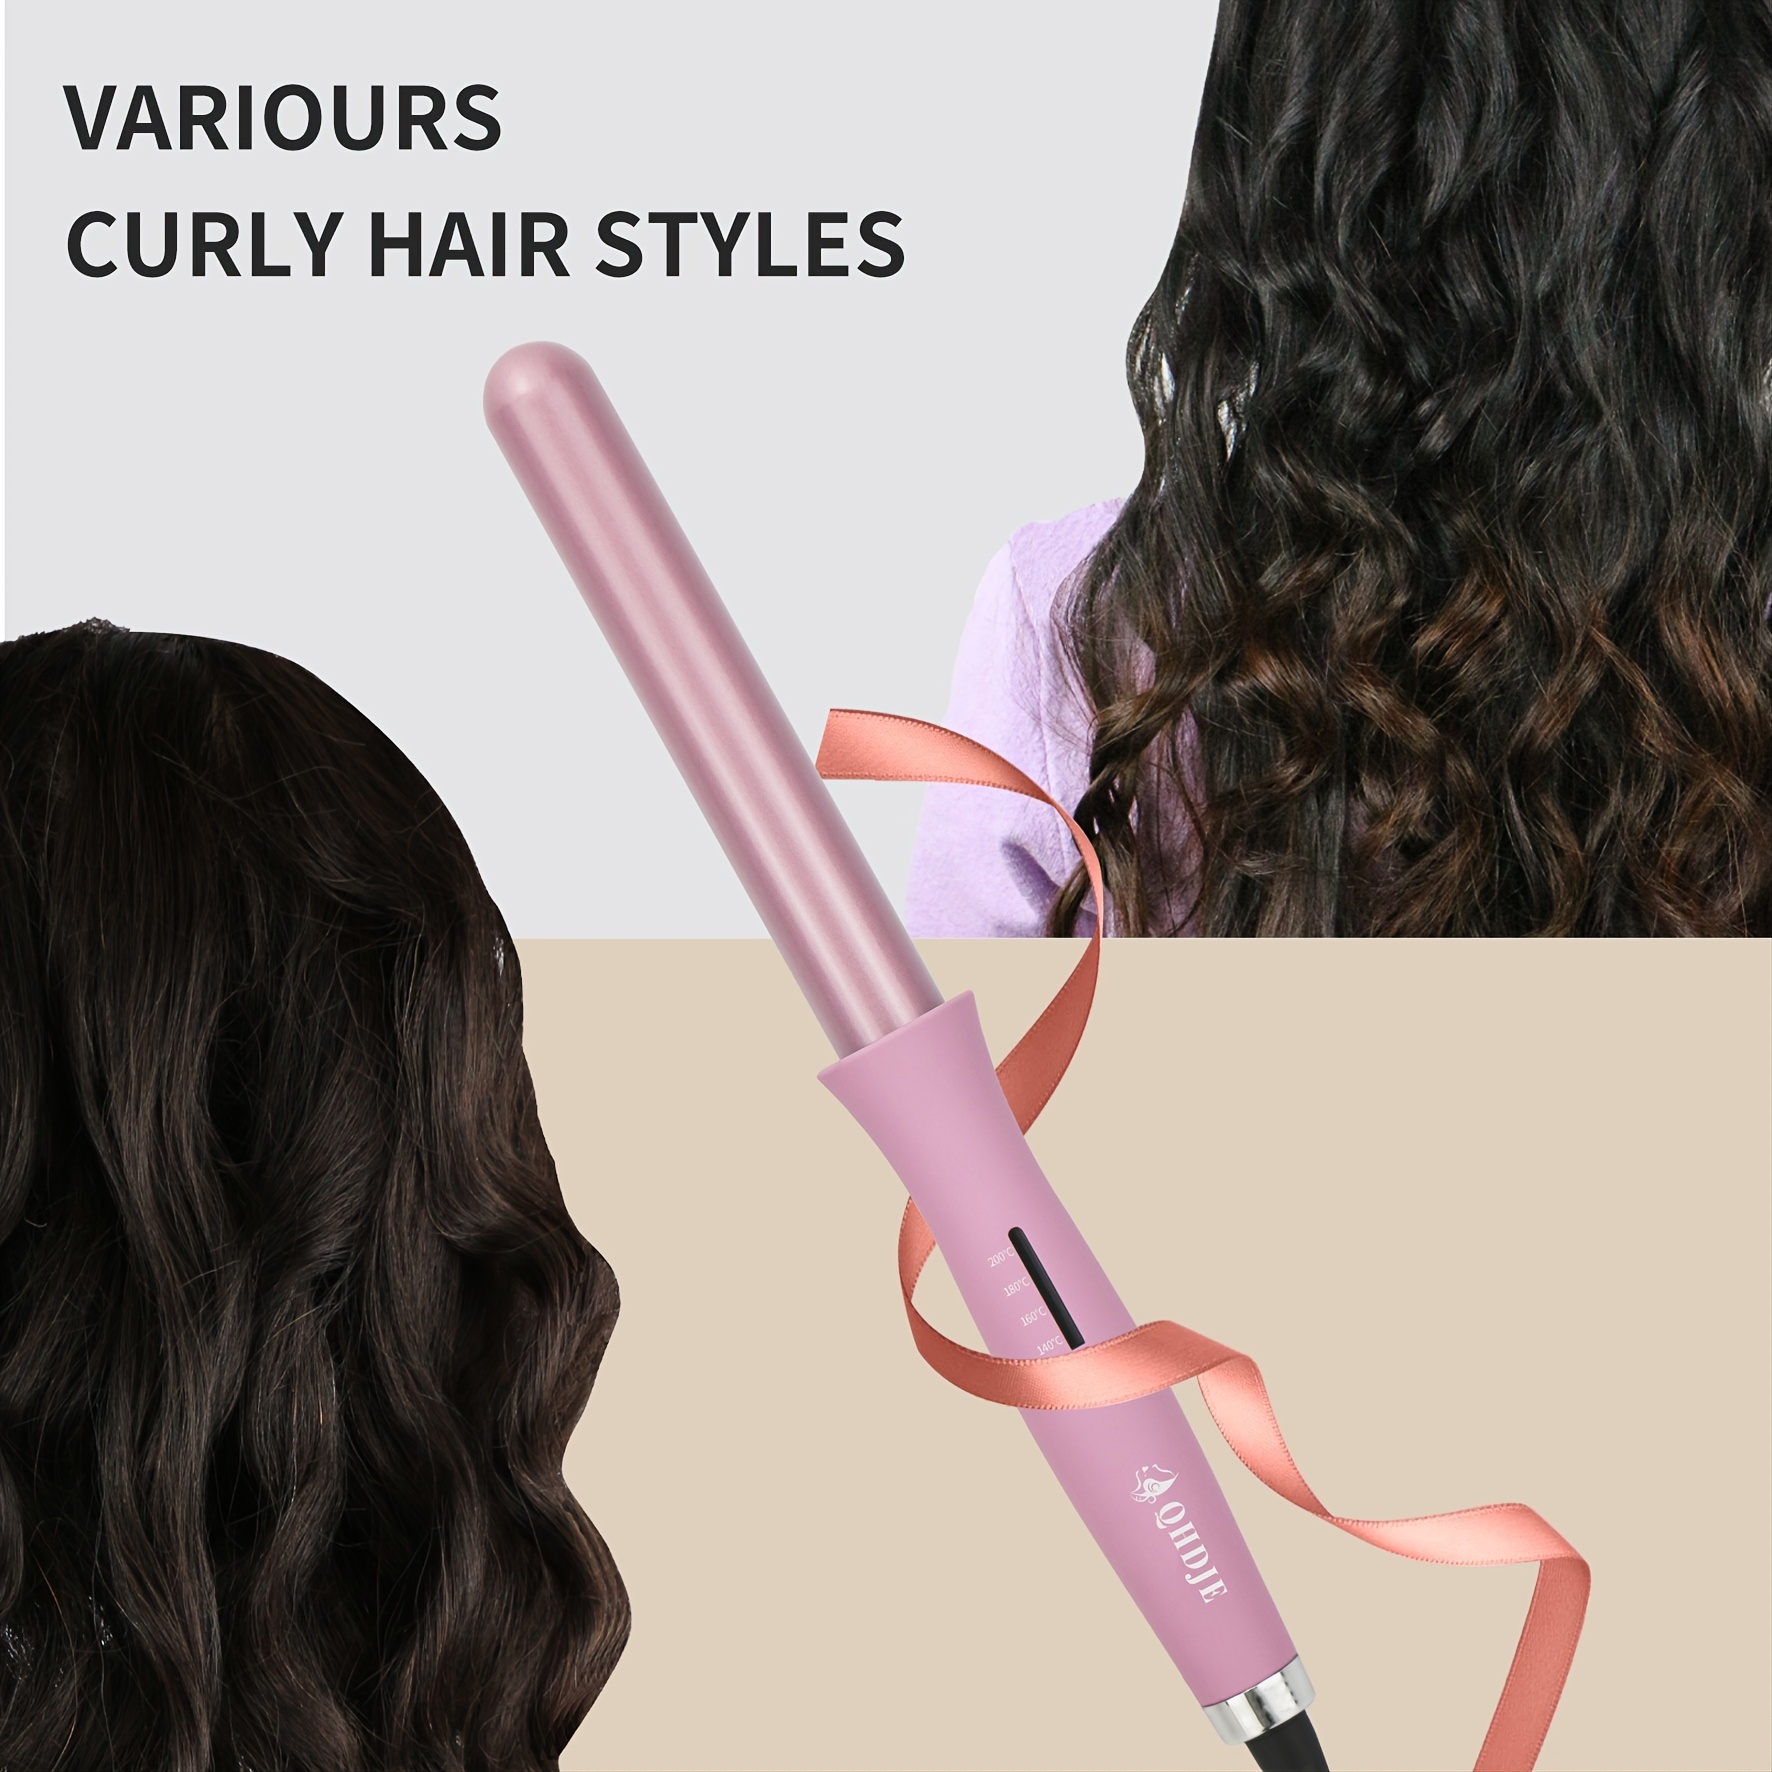 25mm french  curly hair styling curling iron automatic hair curling wand hair styling curler for diy salon professional use for all hair types details 2